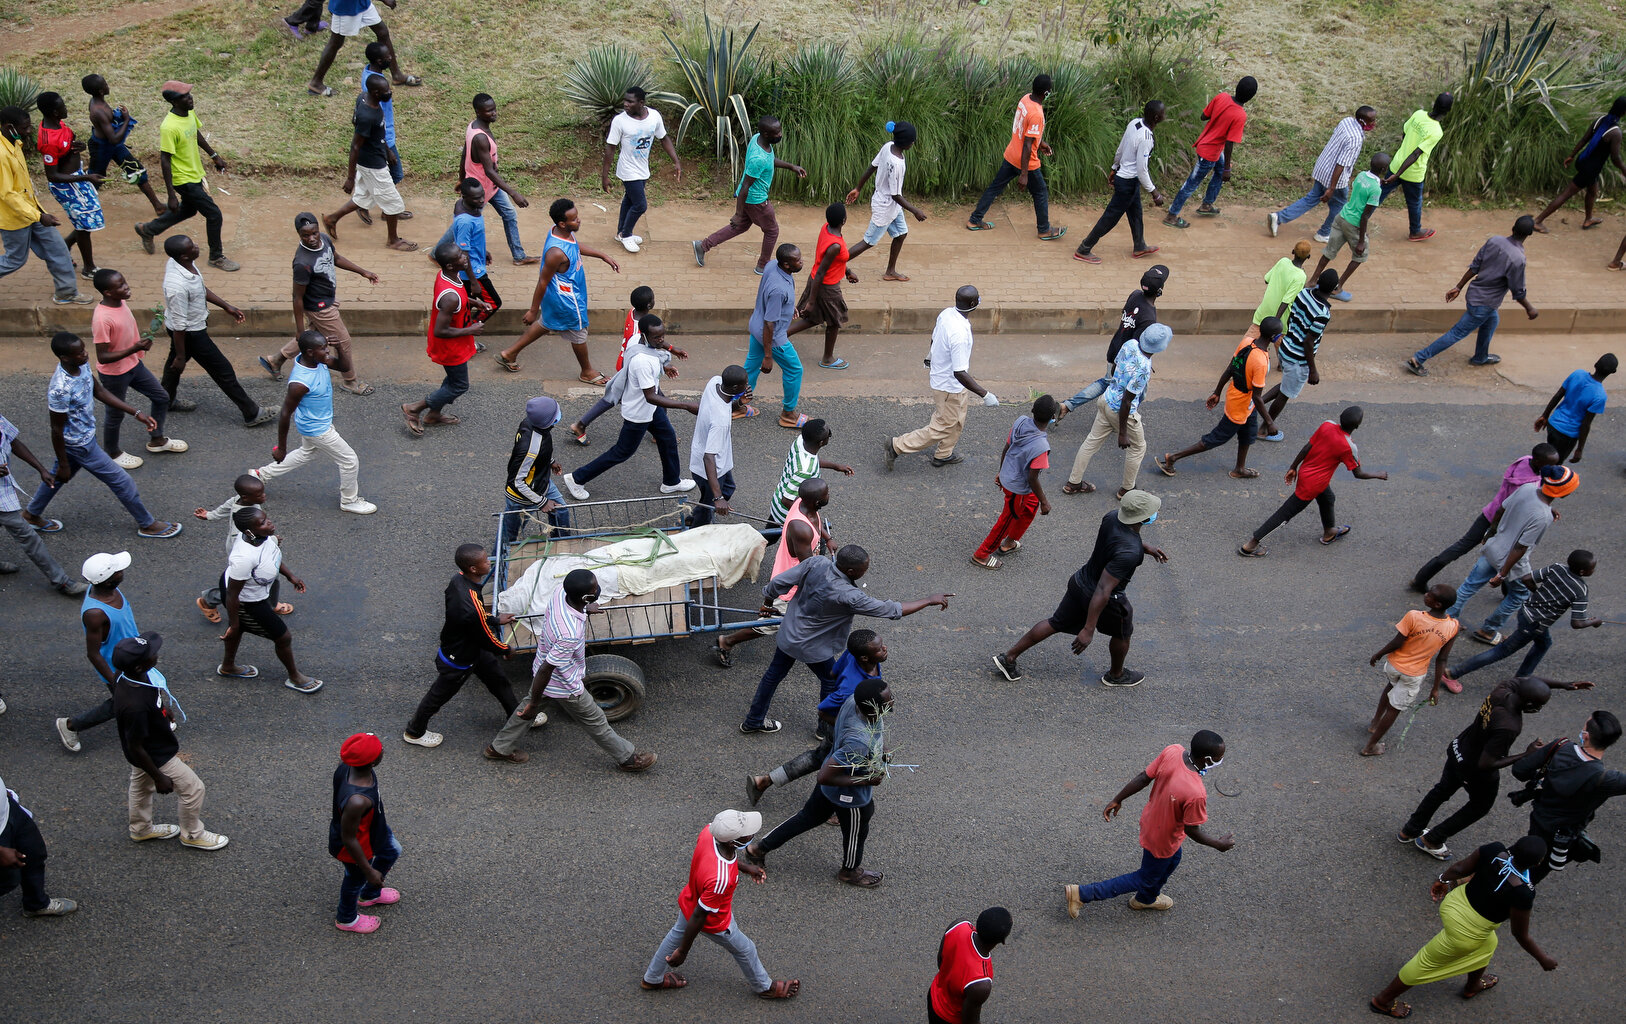  Residents protest with the covered dead body of a man, who they claimed had been beaten by police for being outside during the dusk to dawn curfew, but which could not be independently verified, in the Mathare slum, or informal settlement, of Nairob